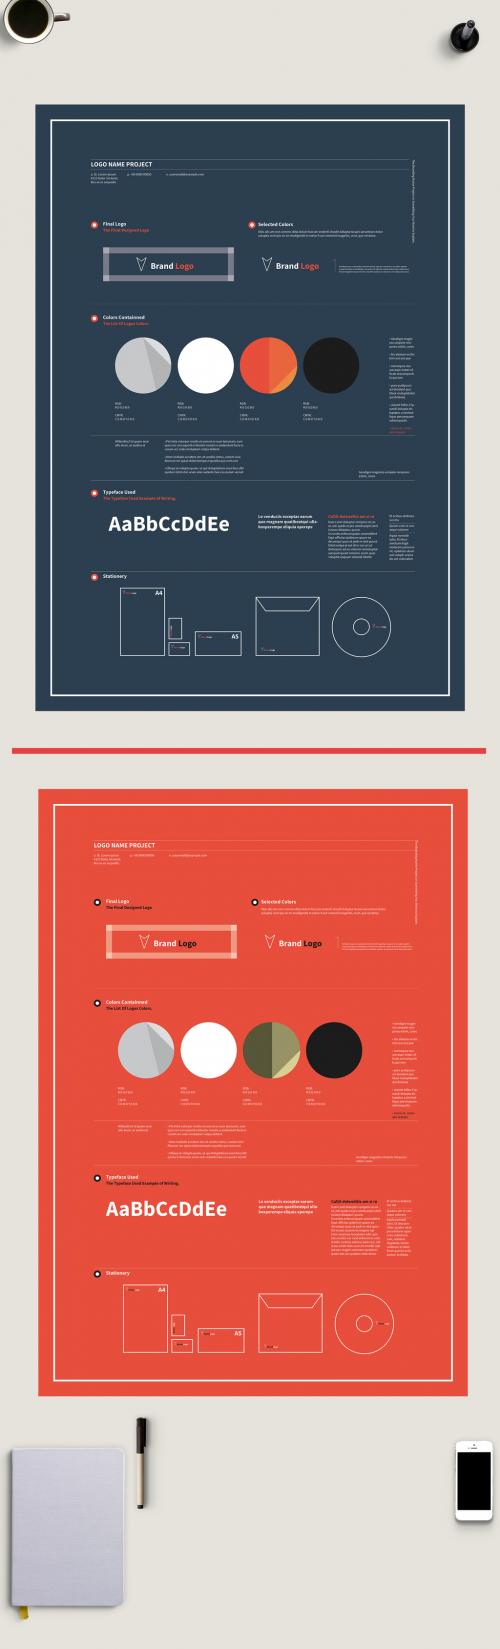 Adobe Stock - Blue and Red Brand Identity Poster Layout - 213703482